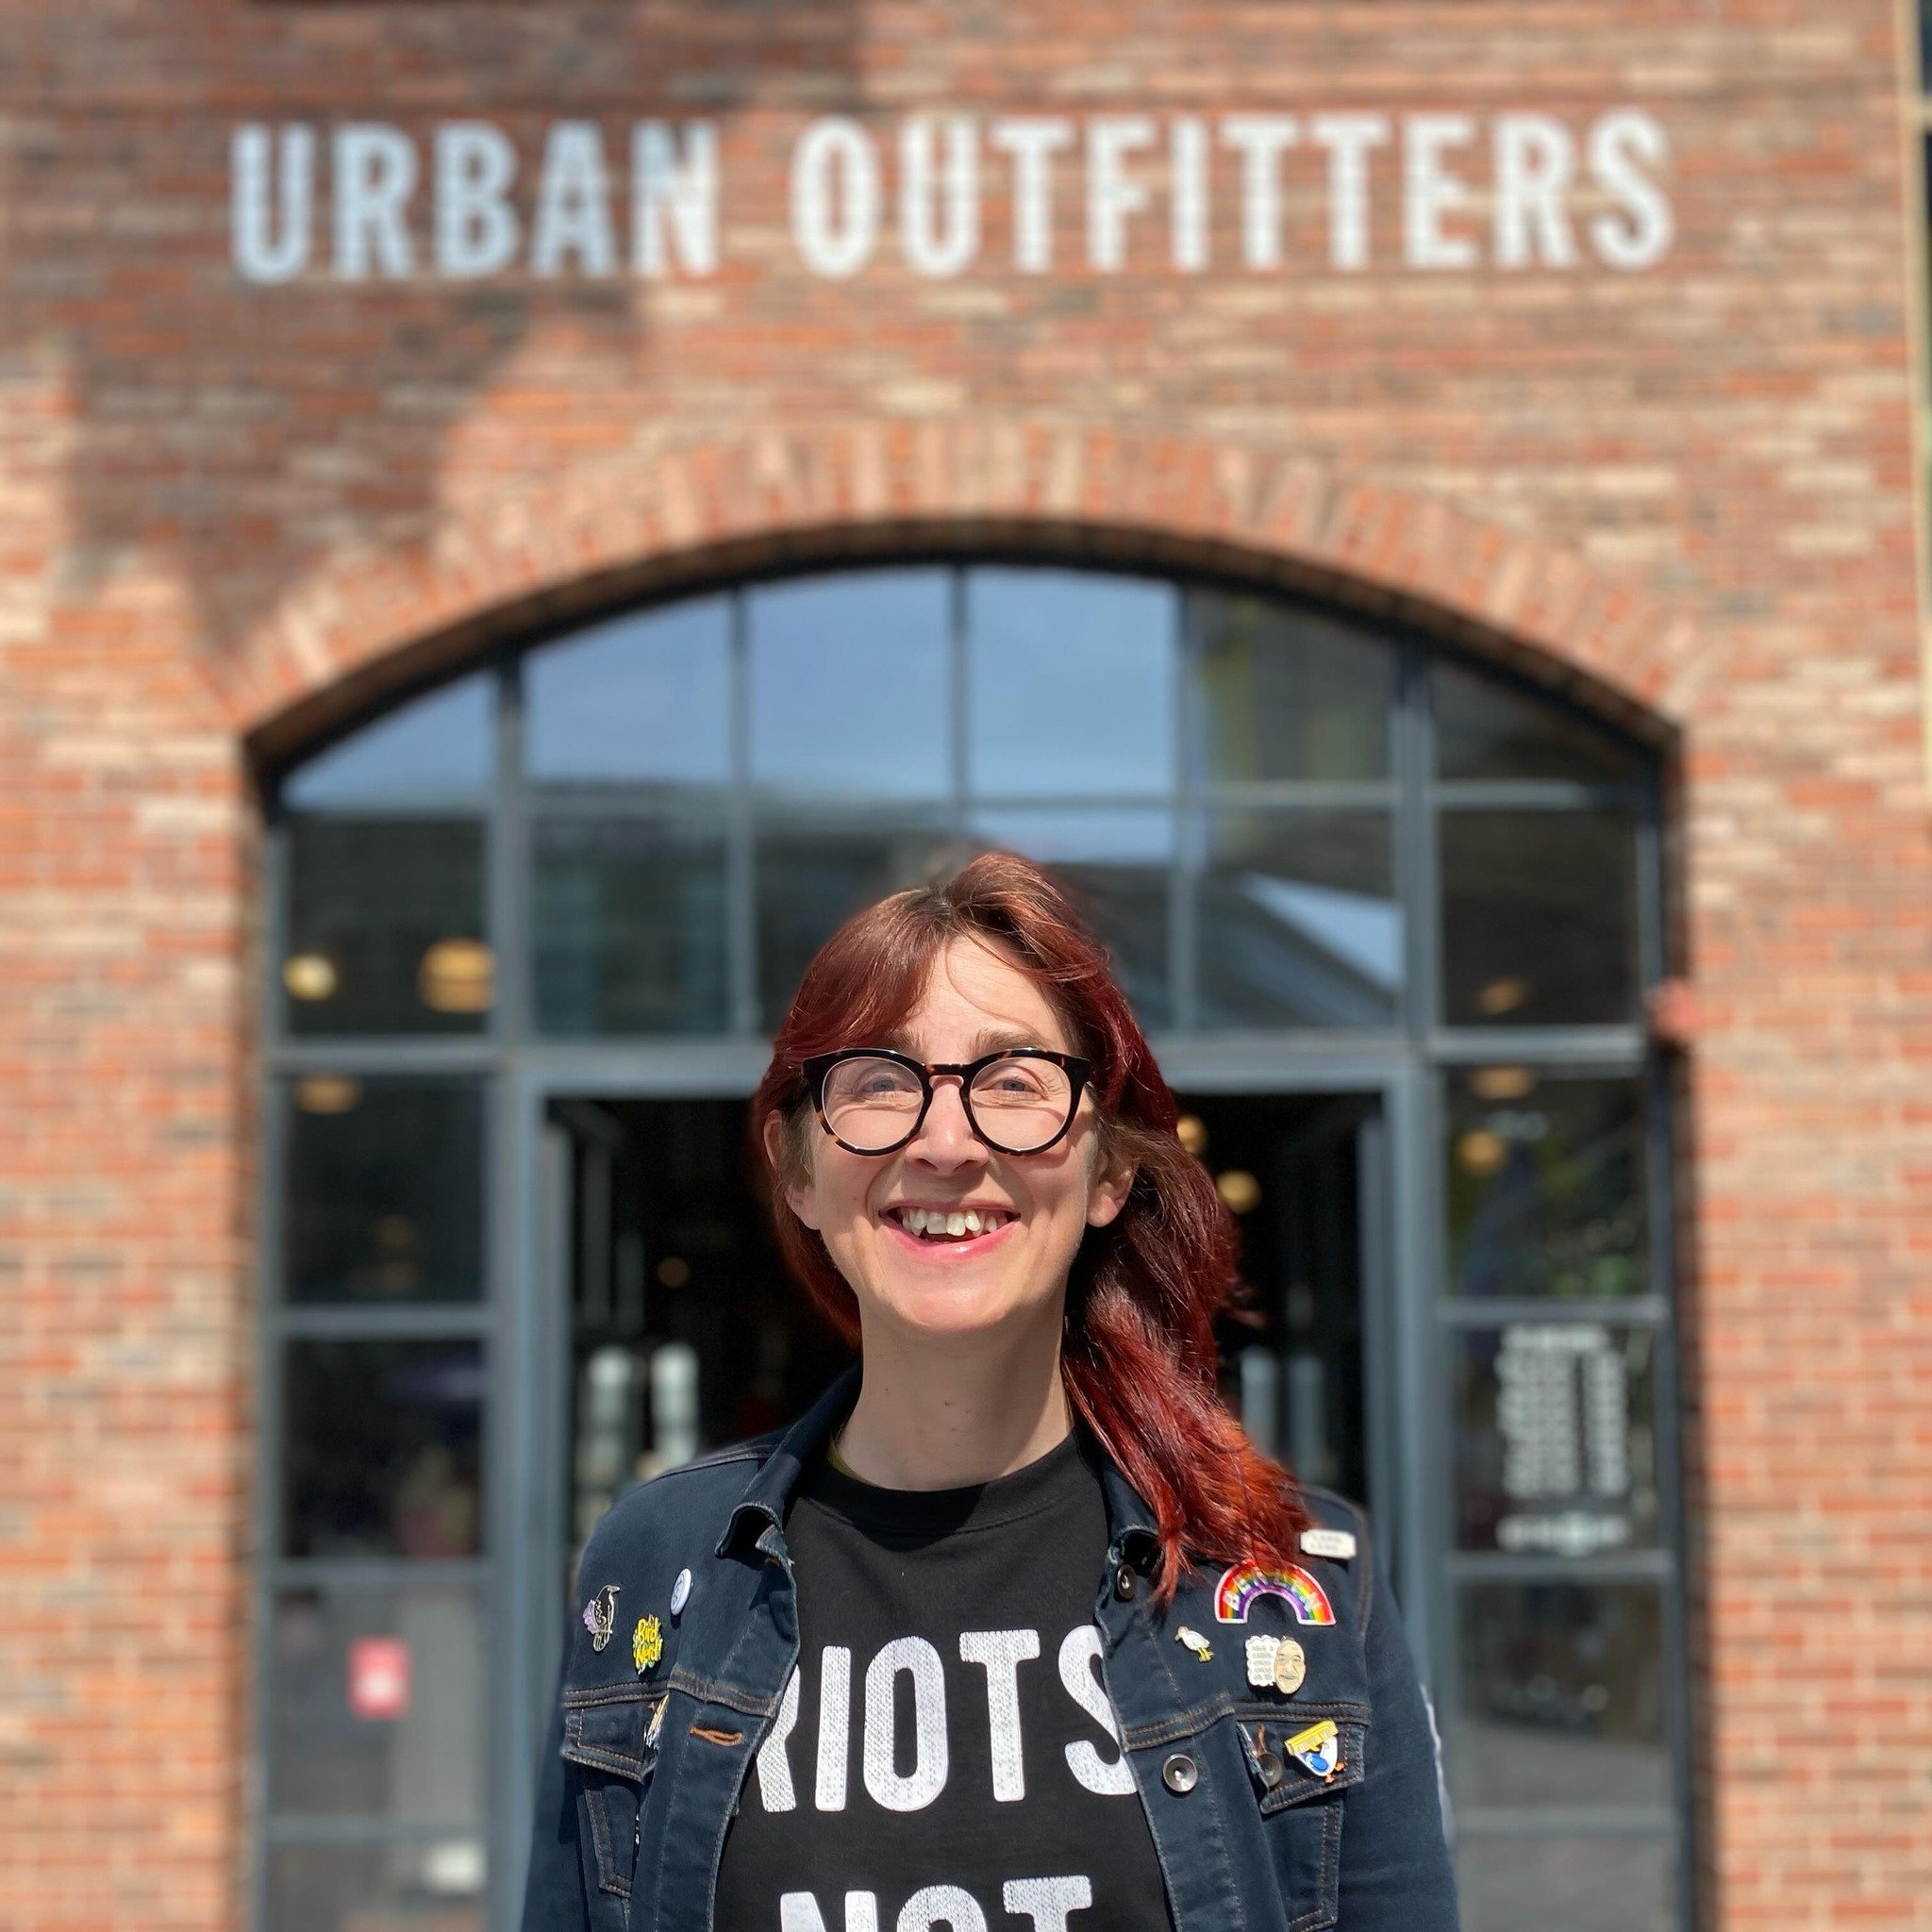 I&rsquo;m popping up in Urban Outfitters this weekend!

Exciting news! I&rsquo;m popping up in Urban Outfitters! I&rsquo;ll be at the Liverpool One store, Paradise Street, on Saturday and Sunday THIS weekend! 

With a few weekends planned for the sum